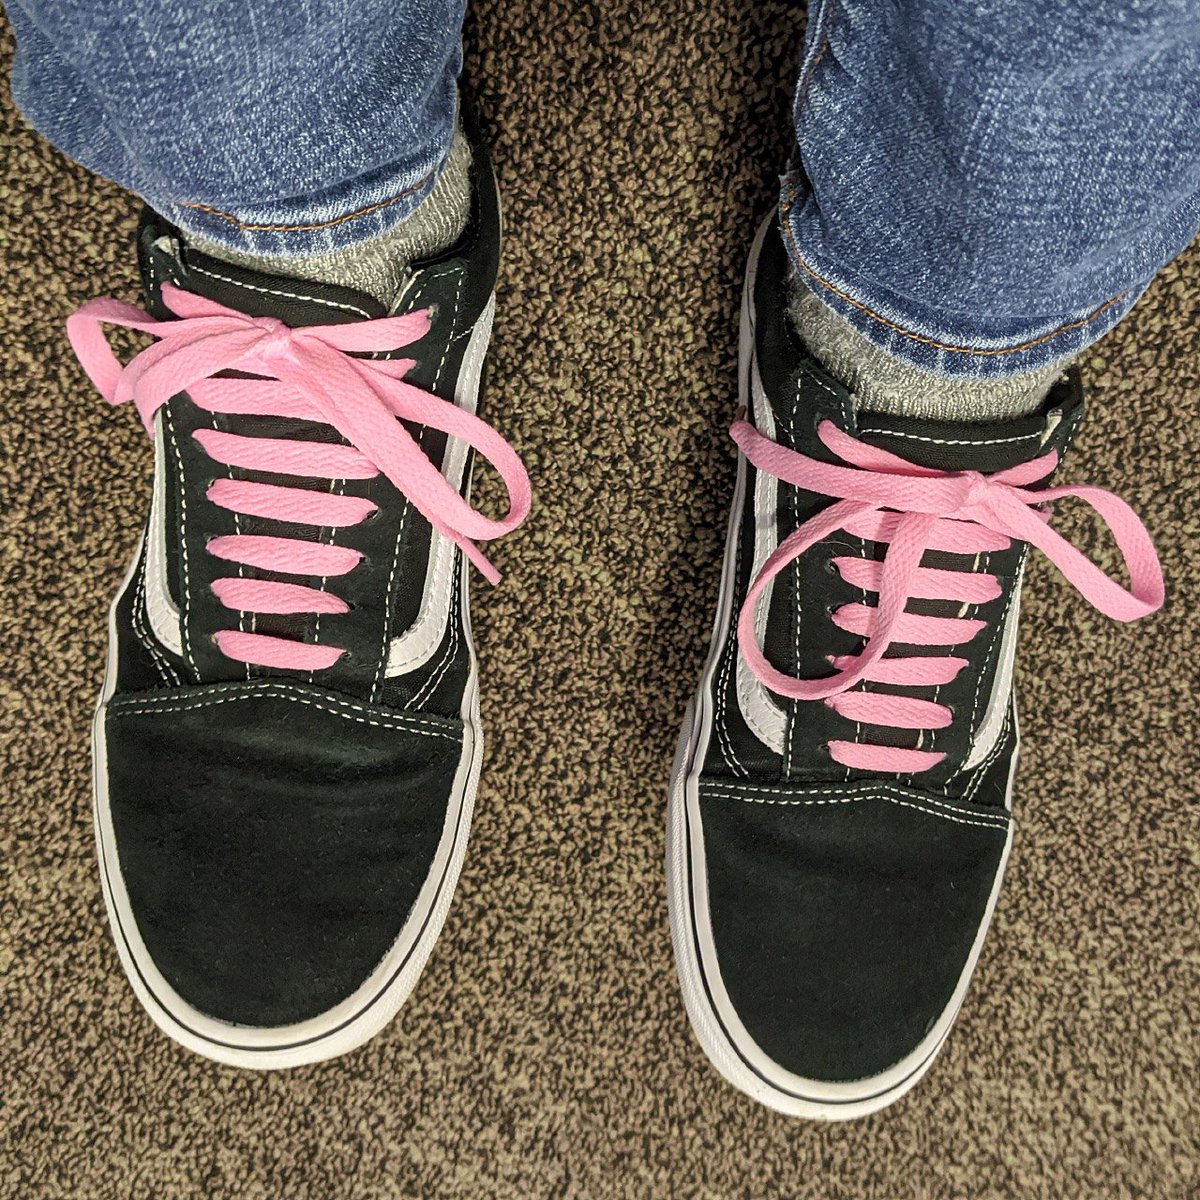 buy \u003e pink vans laces, Up to 73% OFF